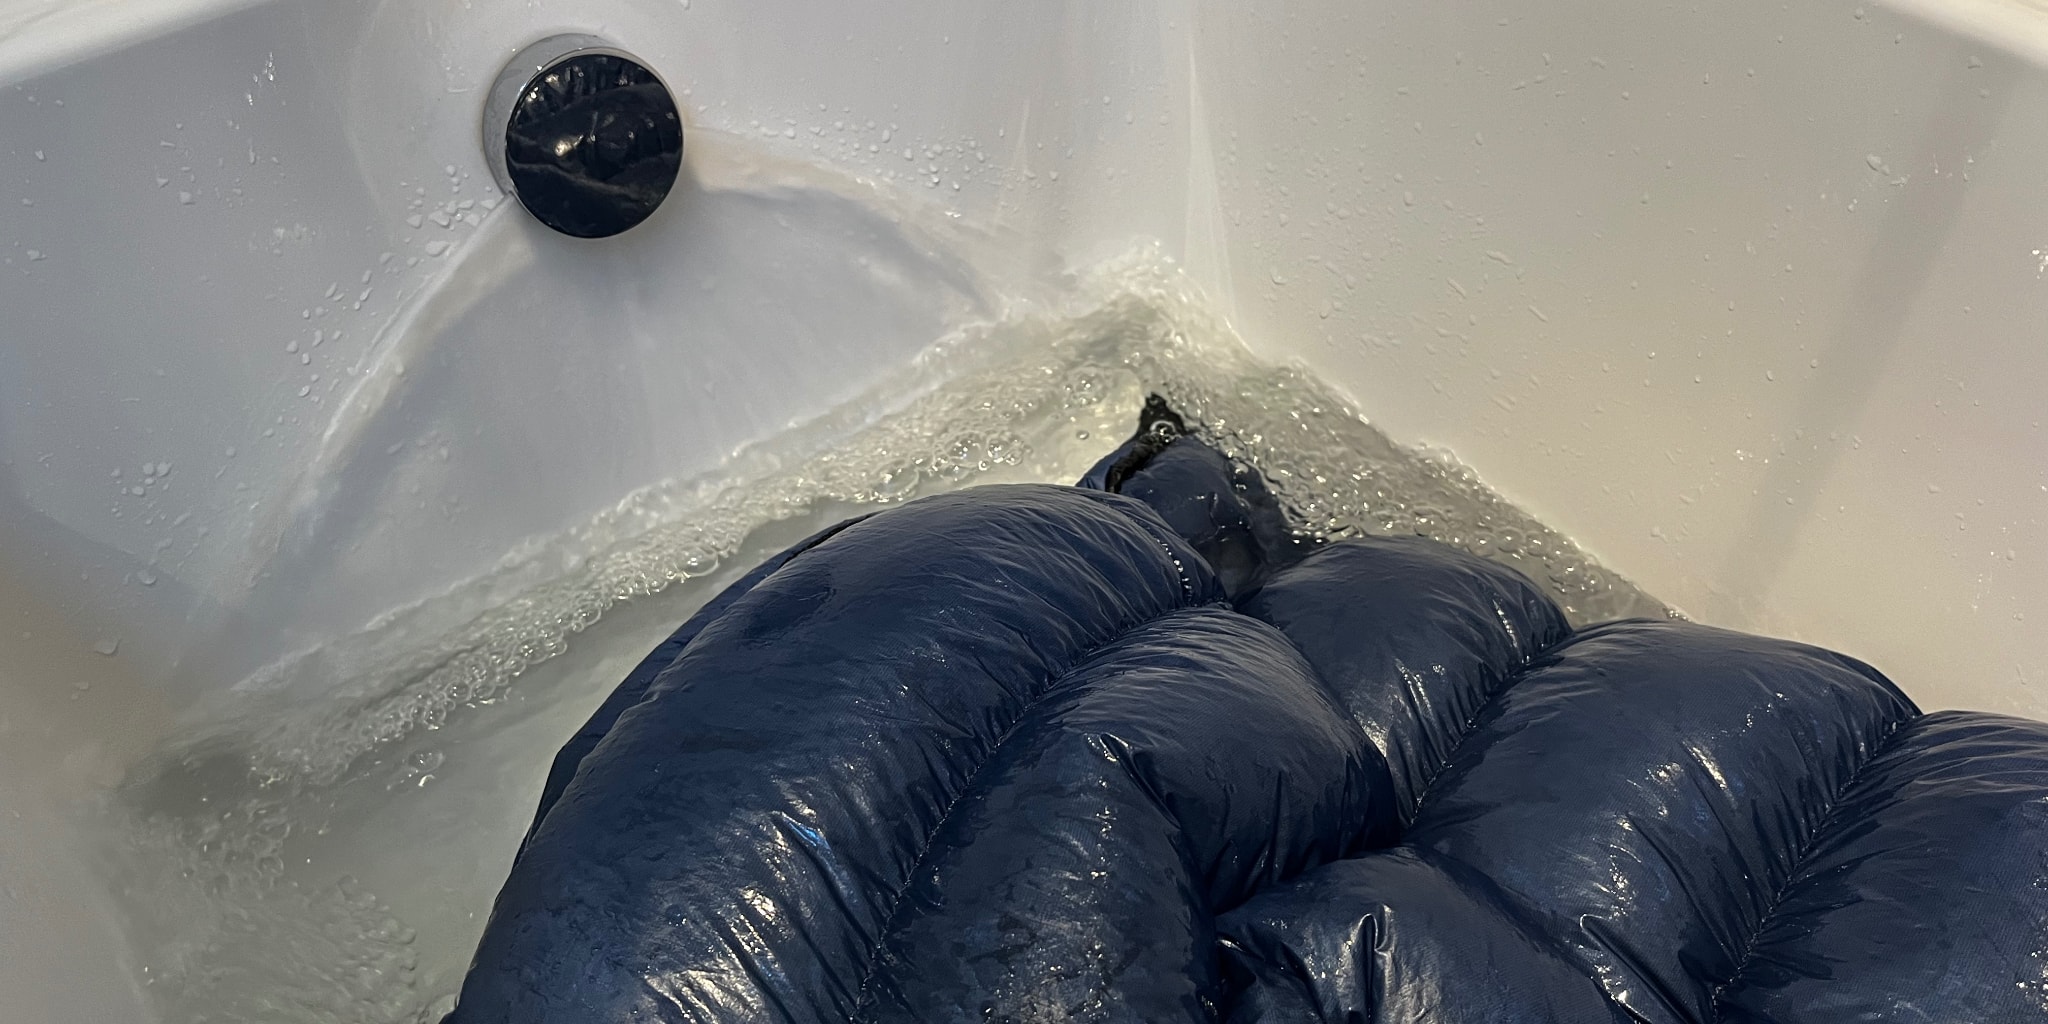 bathtub with sleeping bag inside it being refilled with water